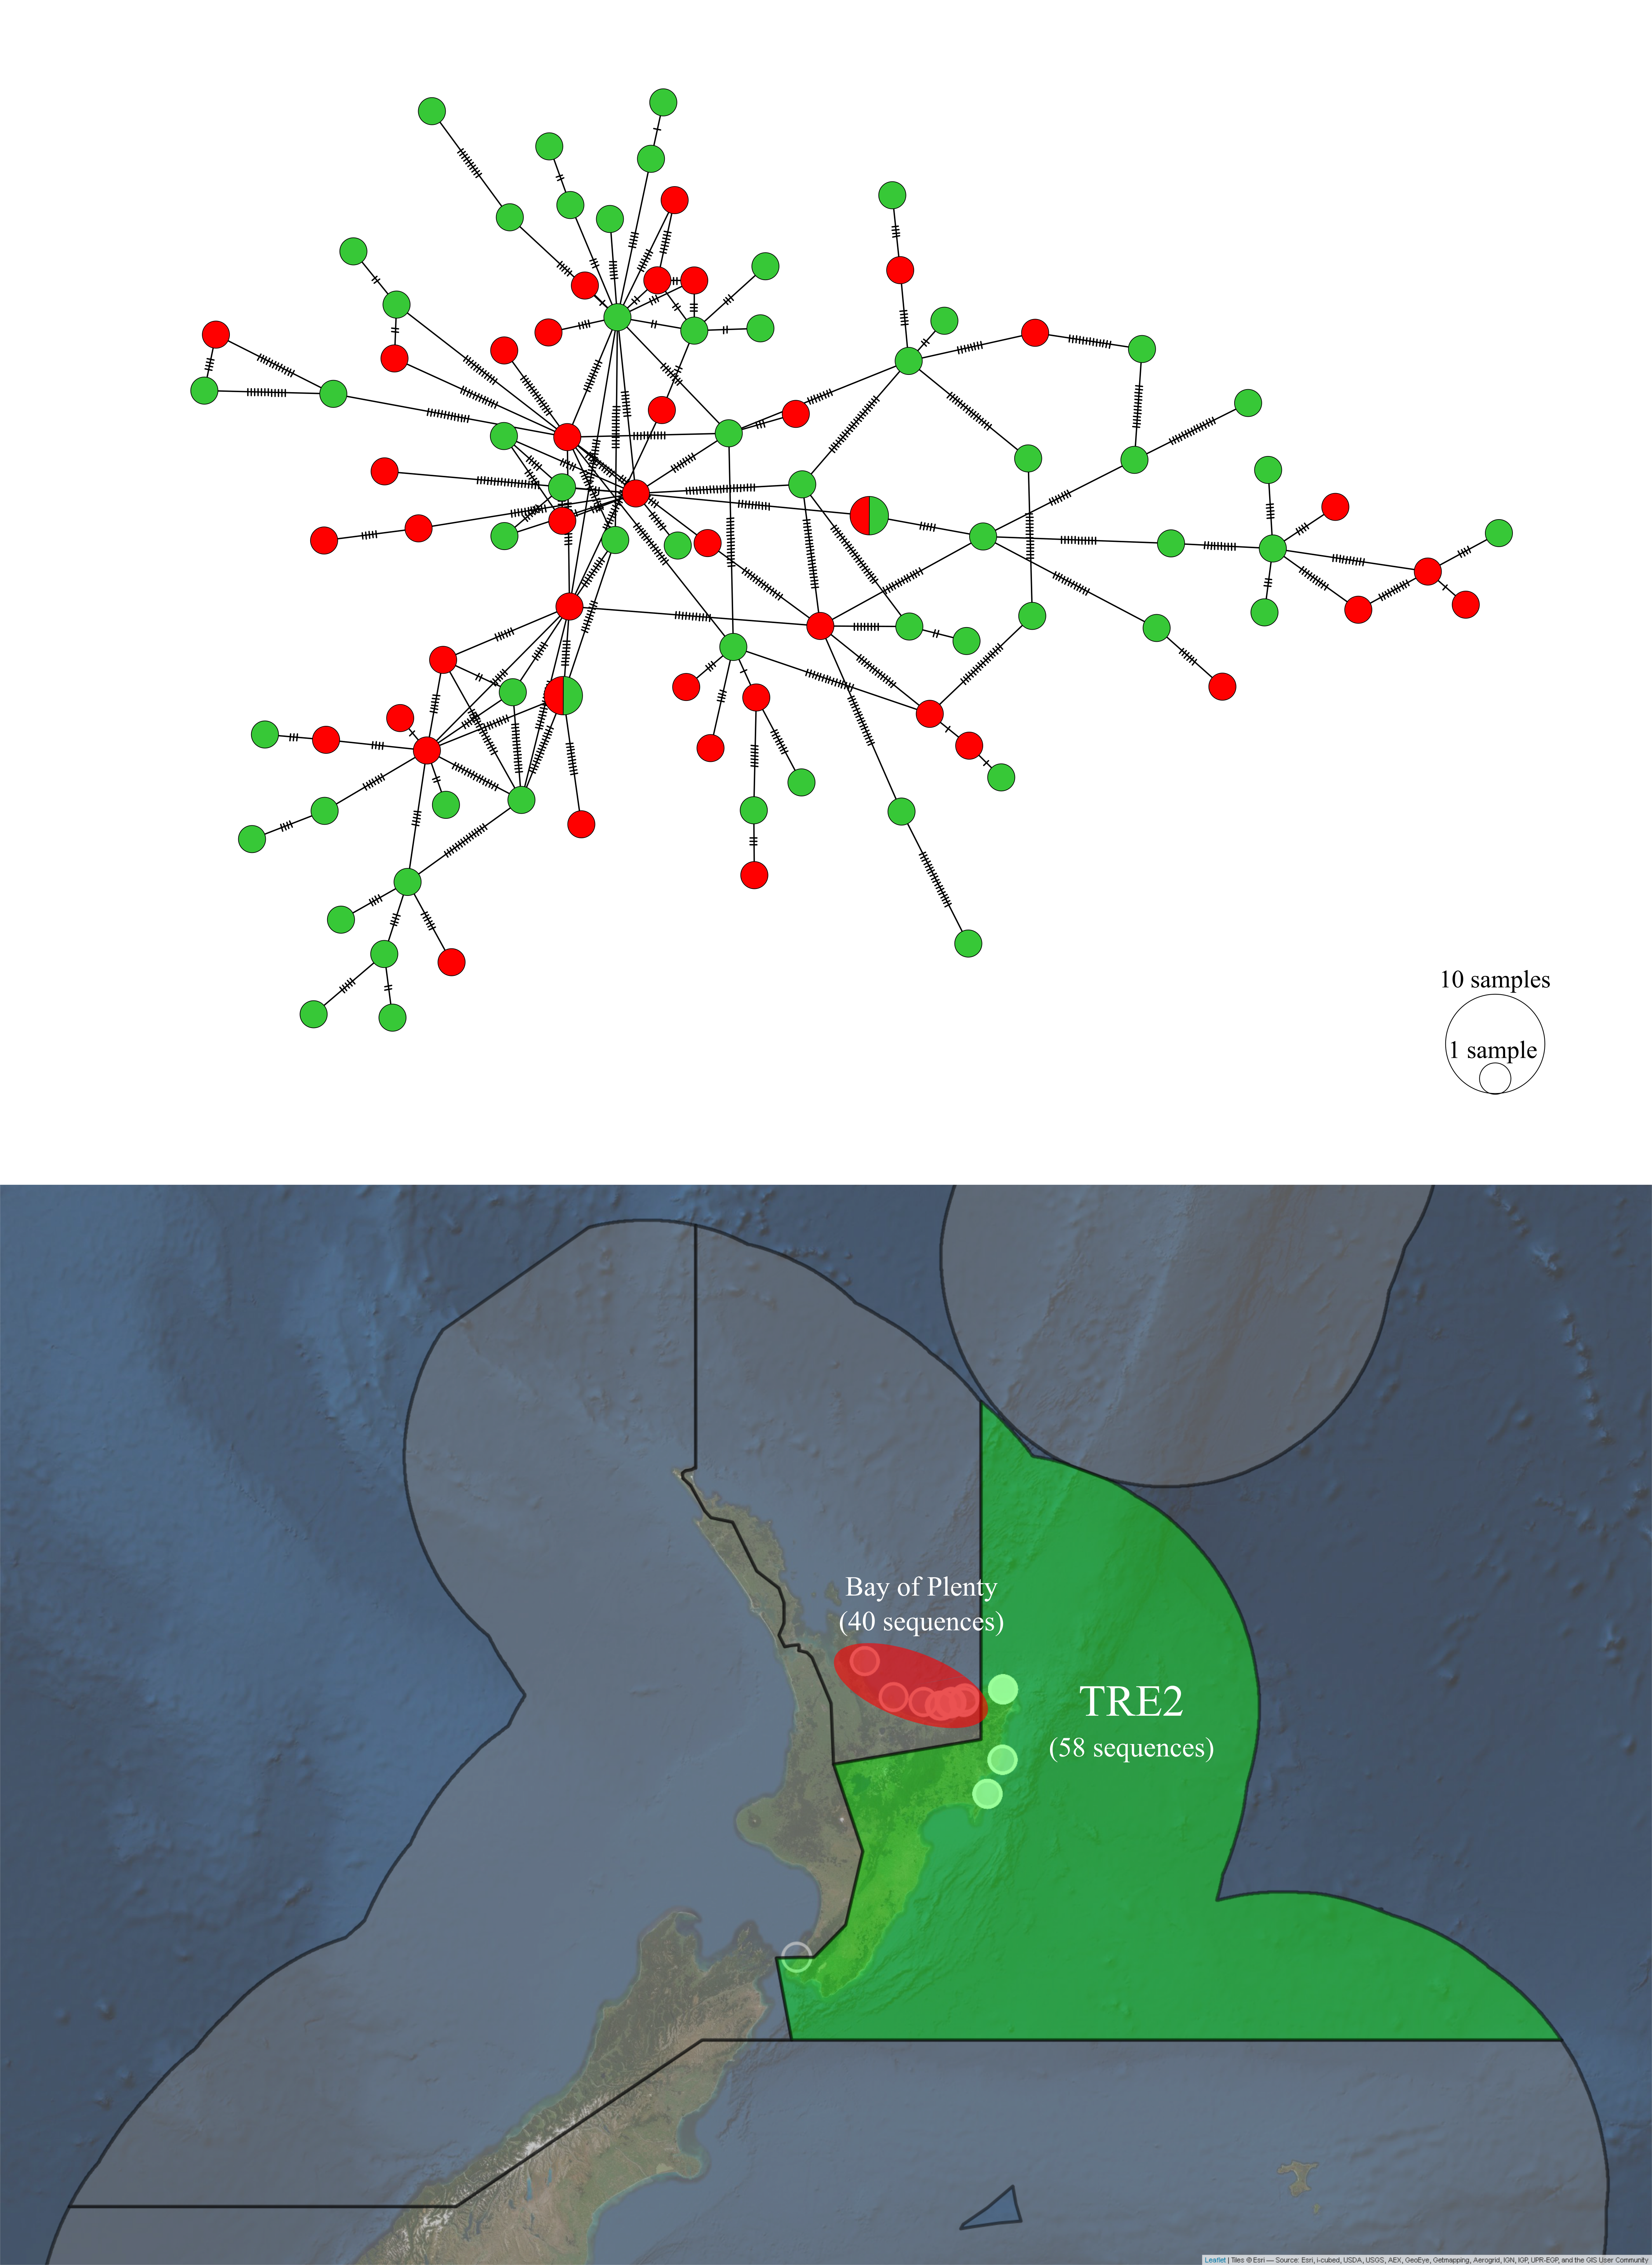 Haplotype network and sampling locations of *P. georgianus* sampled from the Bay of Plenty and TRE2.